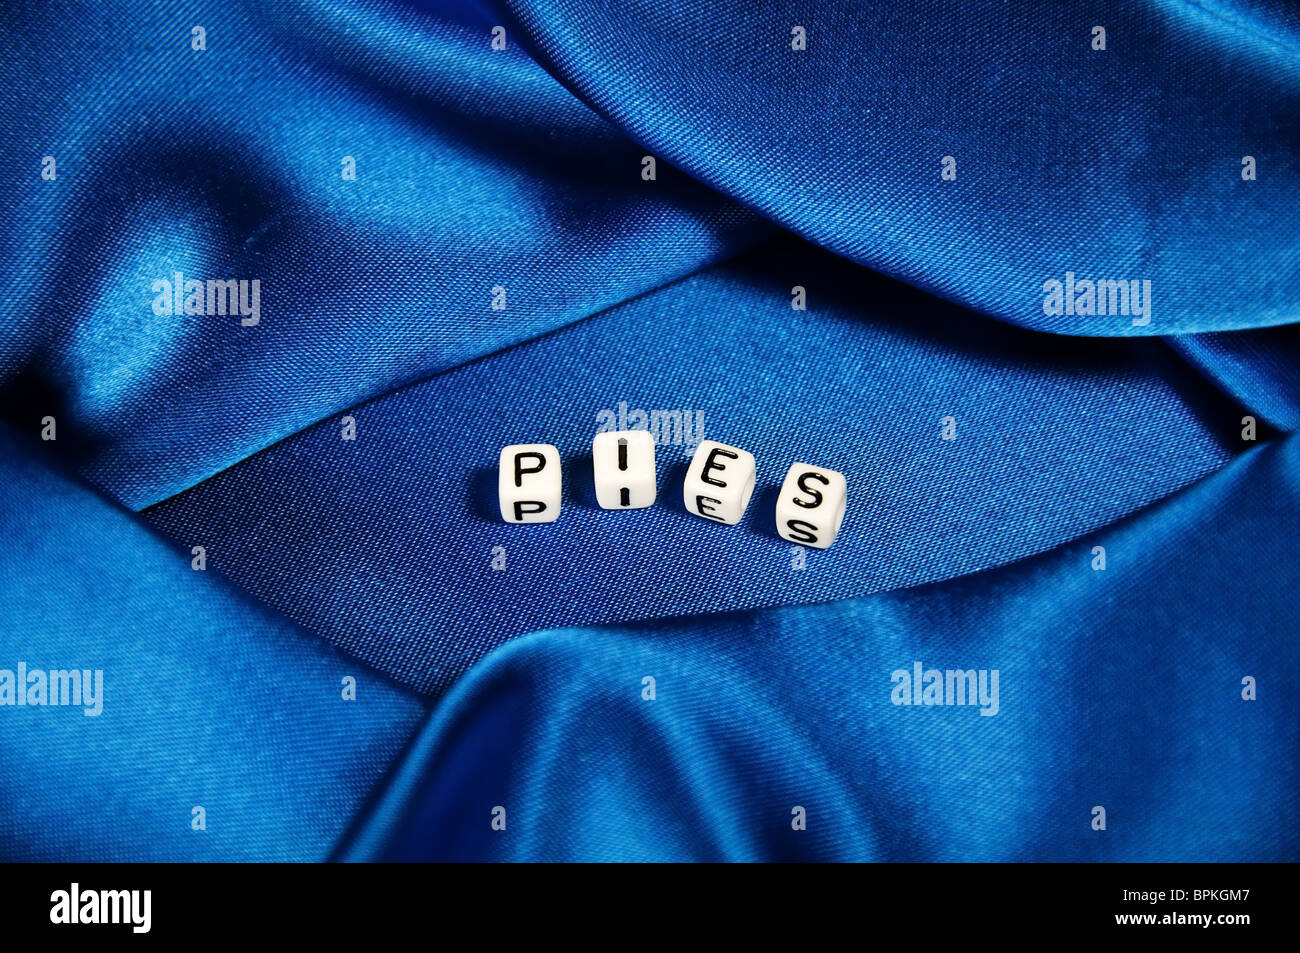 Royal blue satin background with rich folds and wrinkles for texture is the word Pies in black and white cube lettering series. Stock Photo